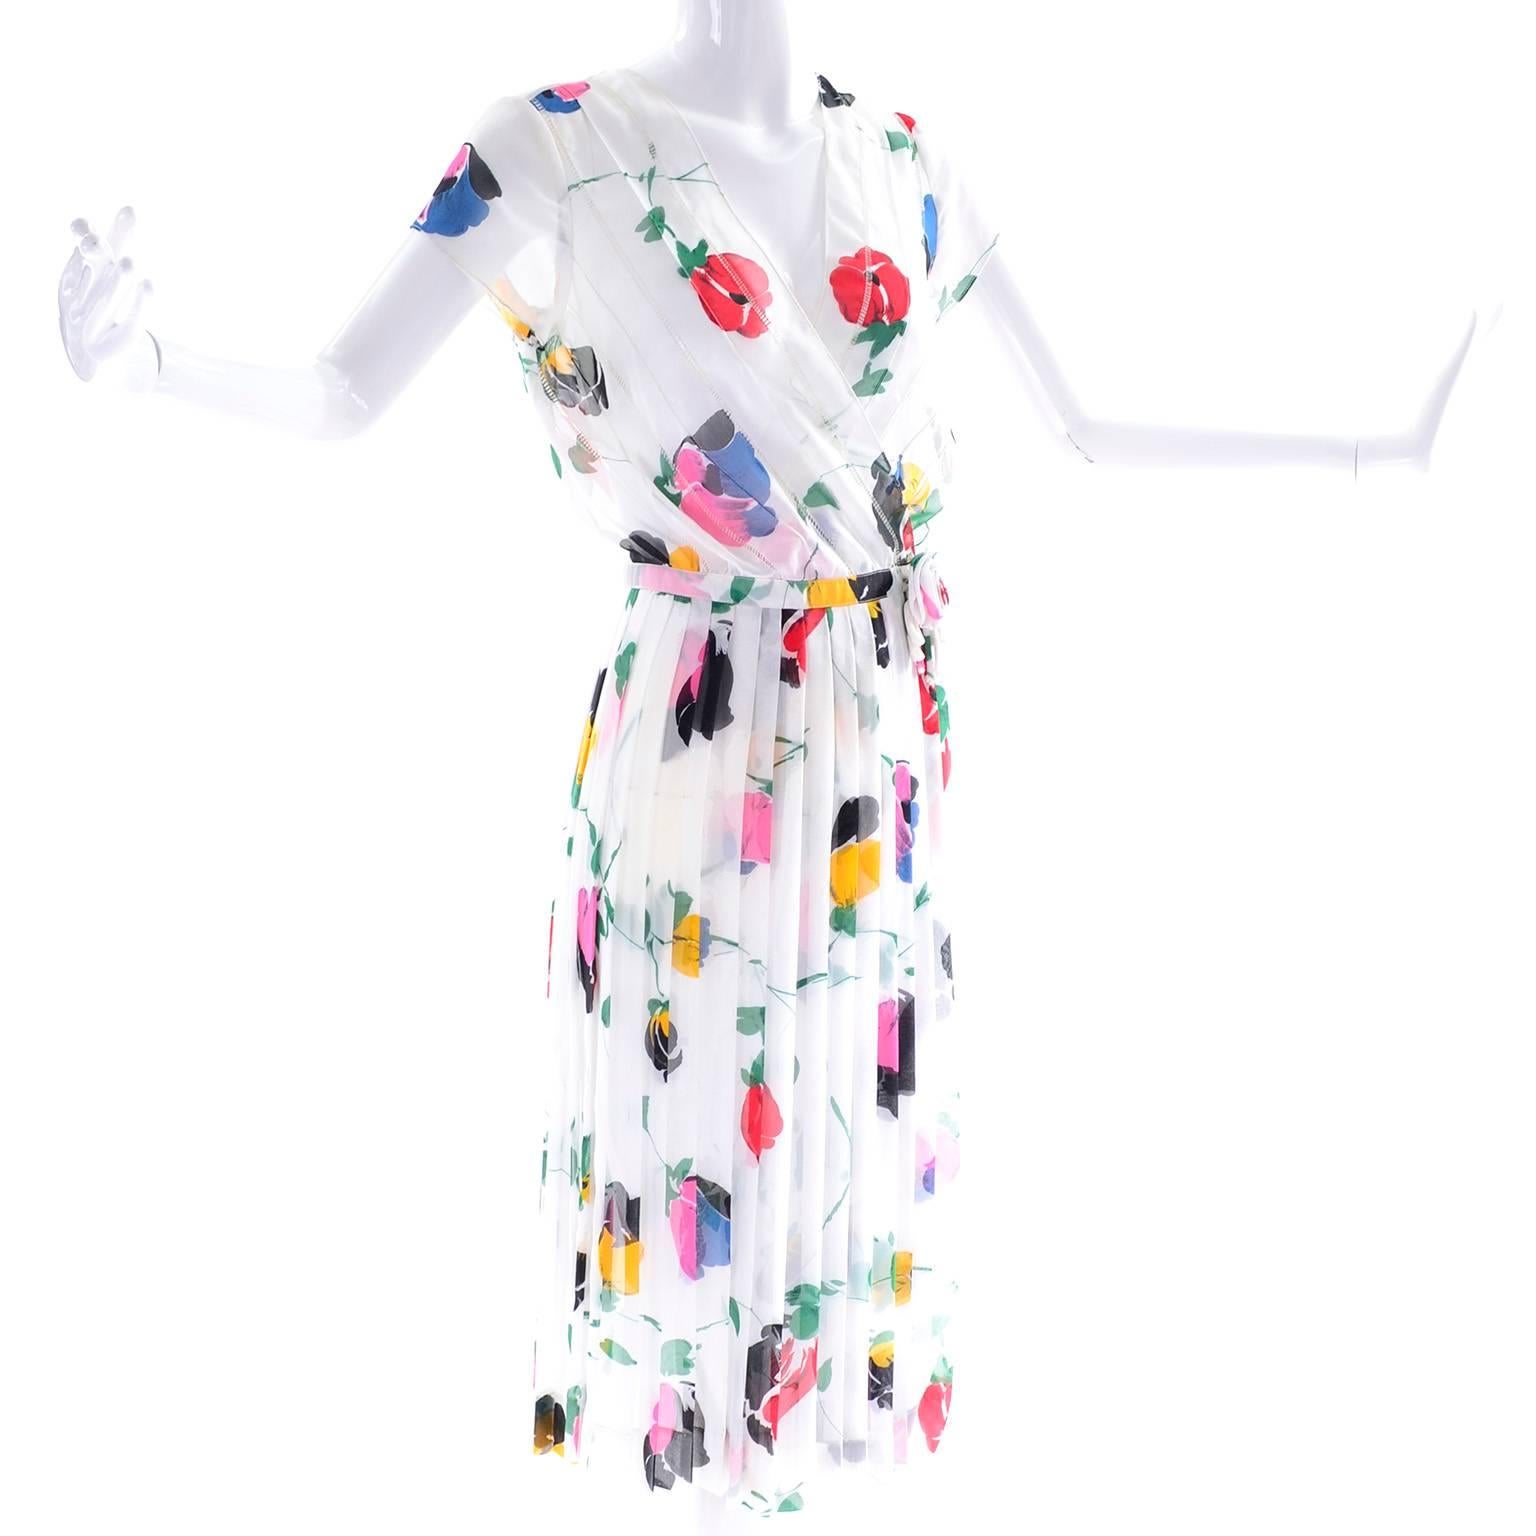 We have been really drawn to vintage Albert Nipon dresses lately. He had such a great way with day dresses especially, and they fit seamlessly into modern wardrobes! This Albert Nipon sheer floral chiffon dress has a pleated skirt and a pretty